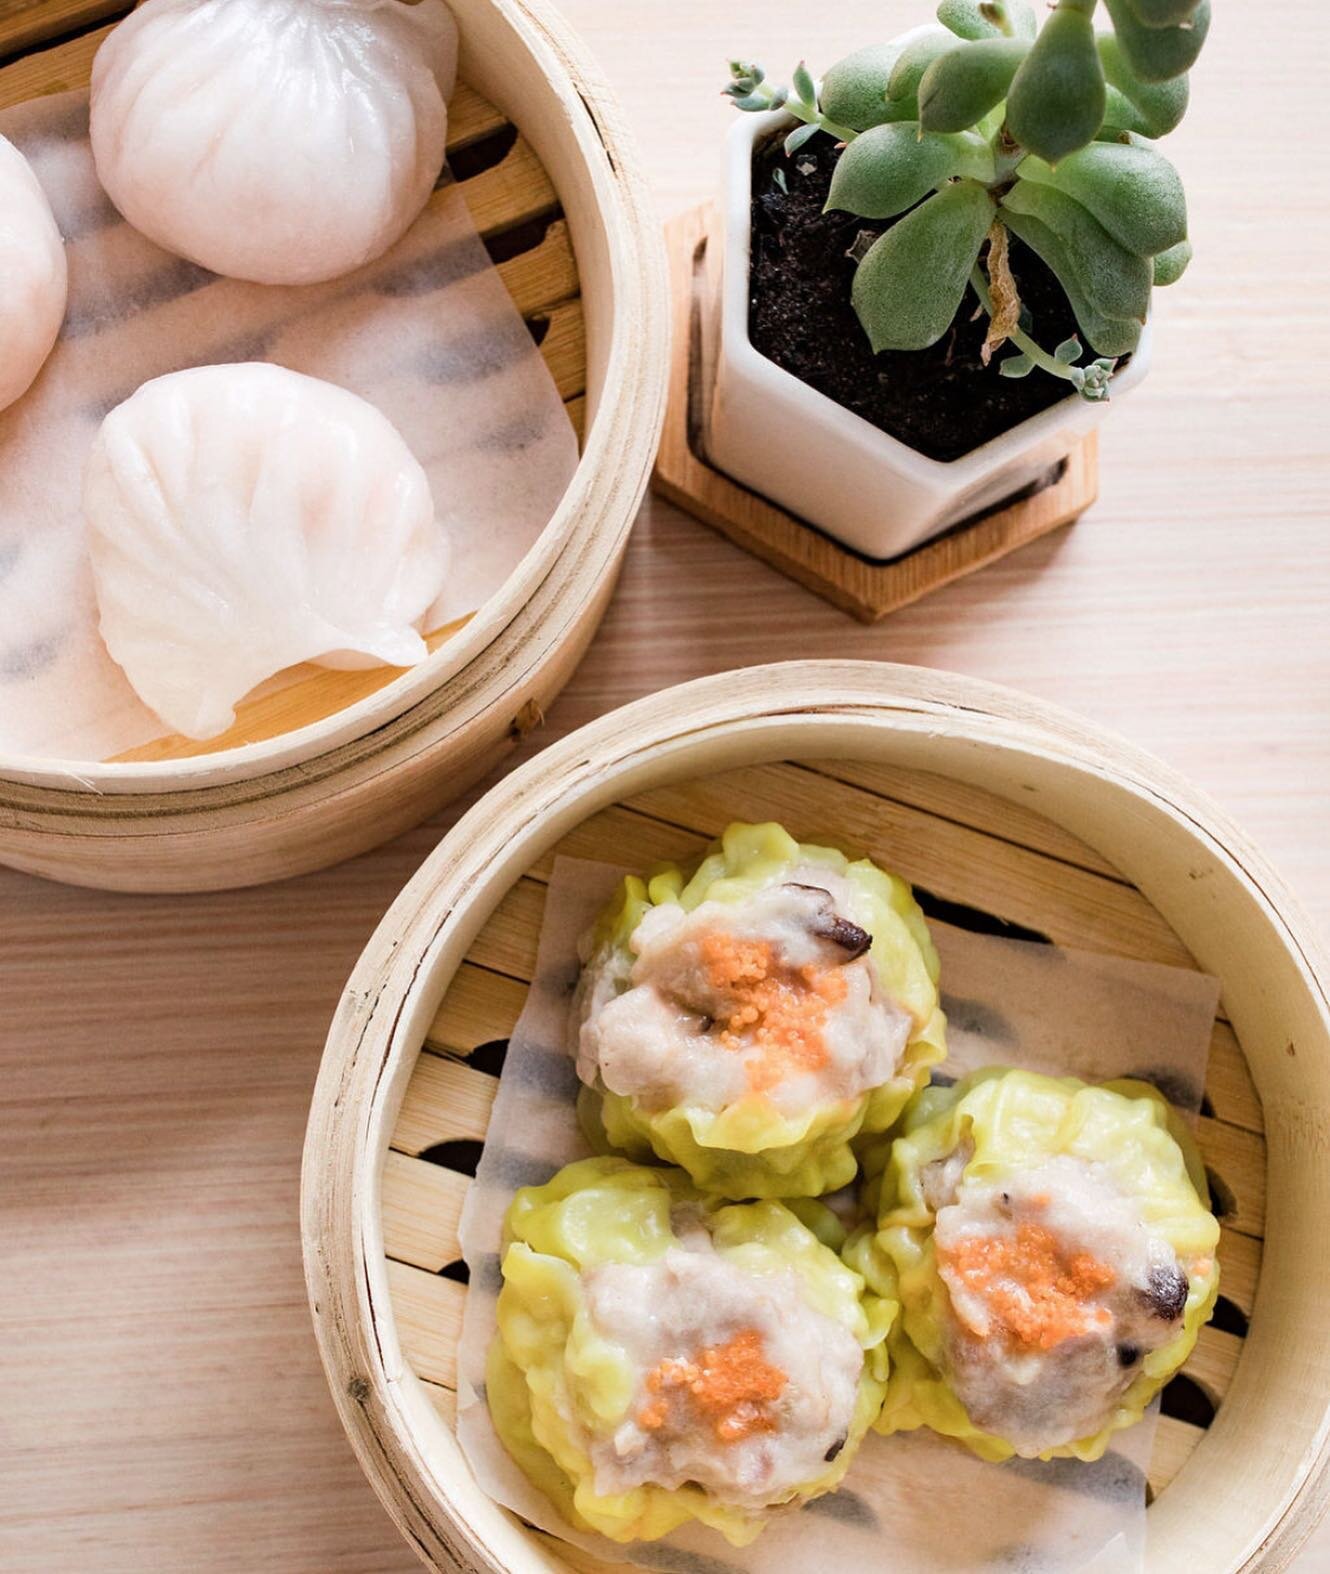 Happy dim sum Sunday! Order some of our delicious savory dim sum items along with our pastries and cute piggy buns to start your Sunday meal!